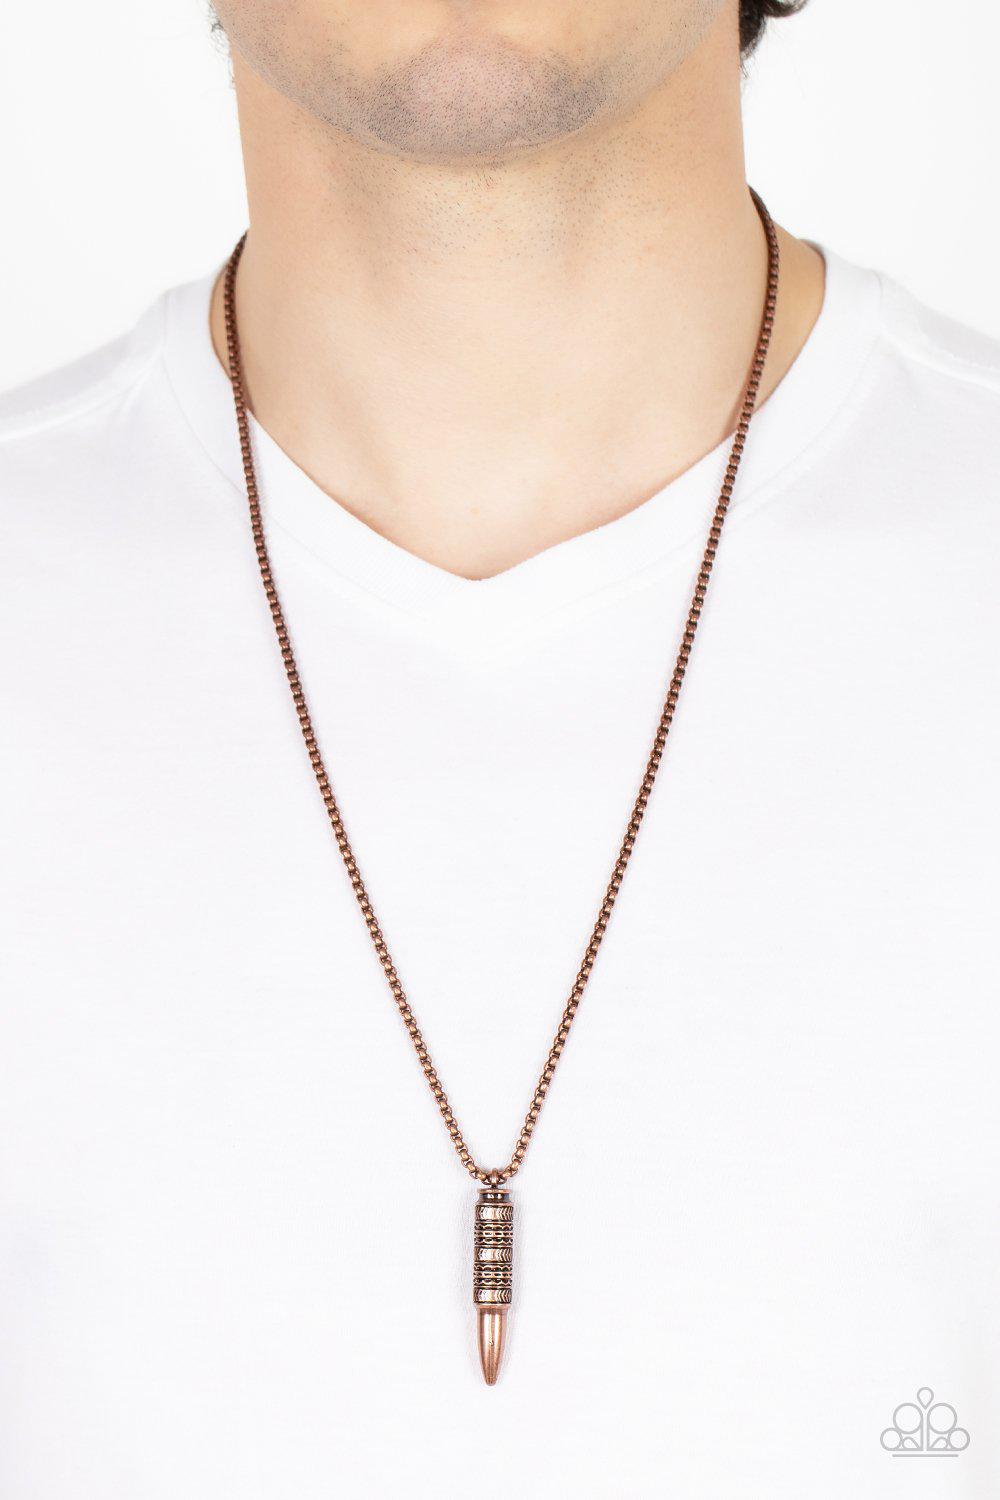 Highland Hunter Men's Copper Bullet Necklace - Paparazzi Accessories- lightbox - CarasShop.com - $5 Jewelry by Cara Jewels